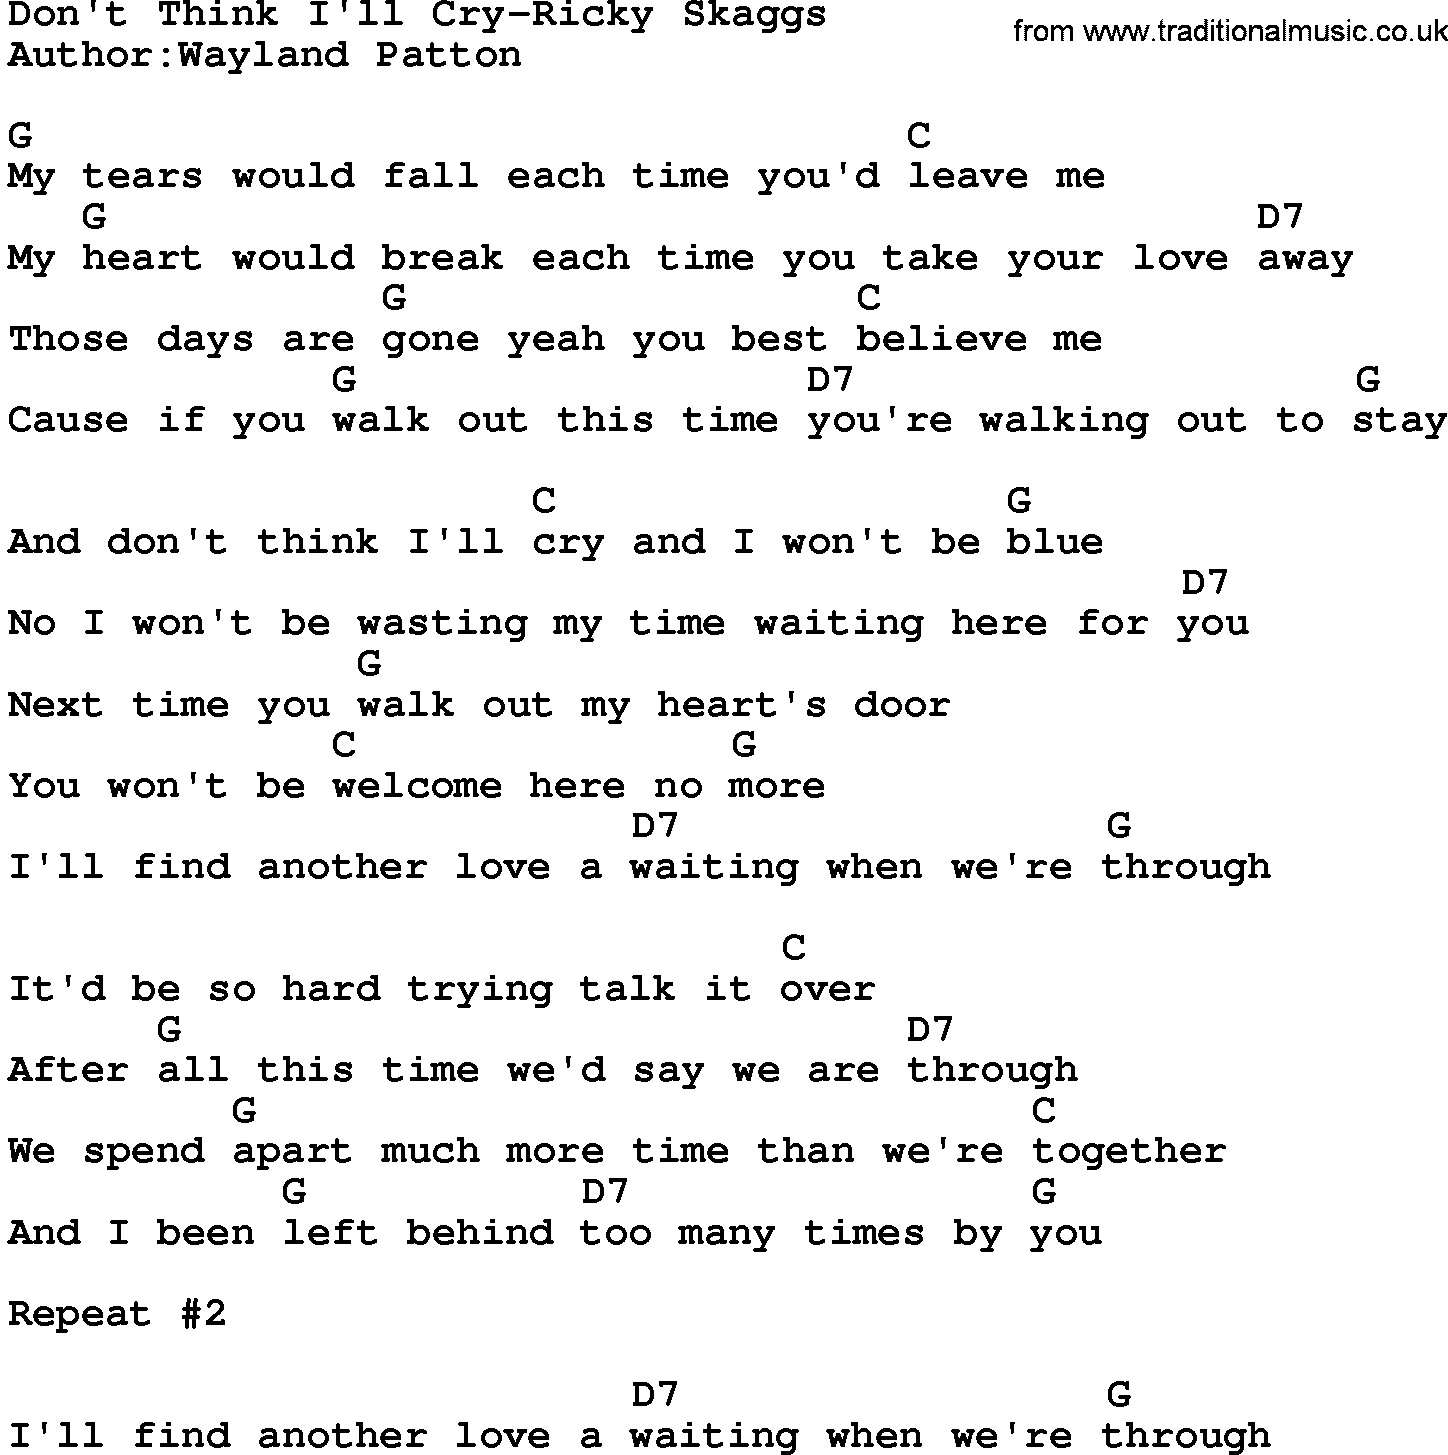 Country music song: Don't Think I'll Cry-Ricky Skaggs lyrics and chords